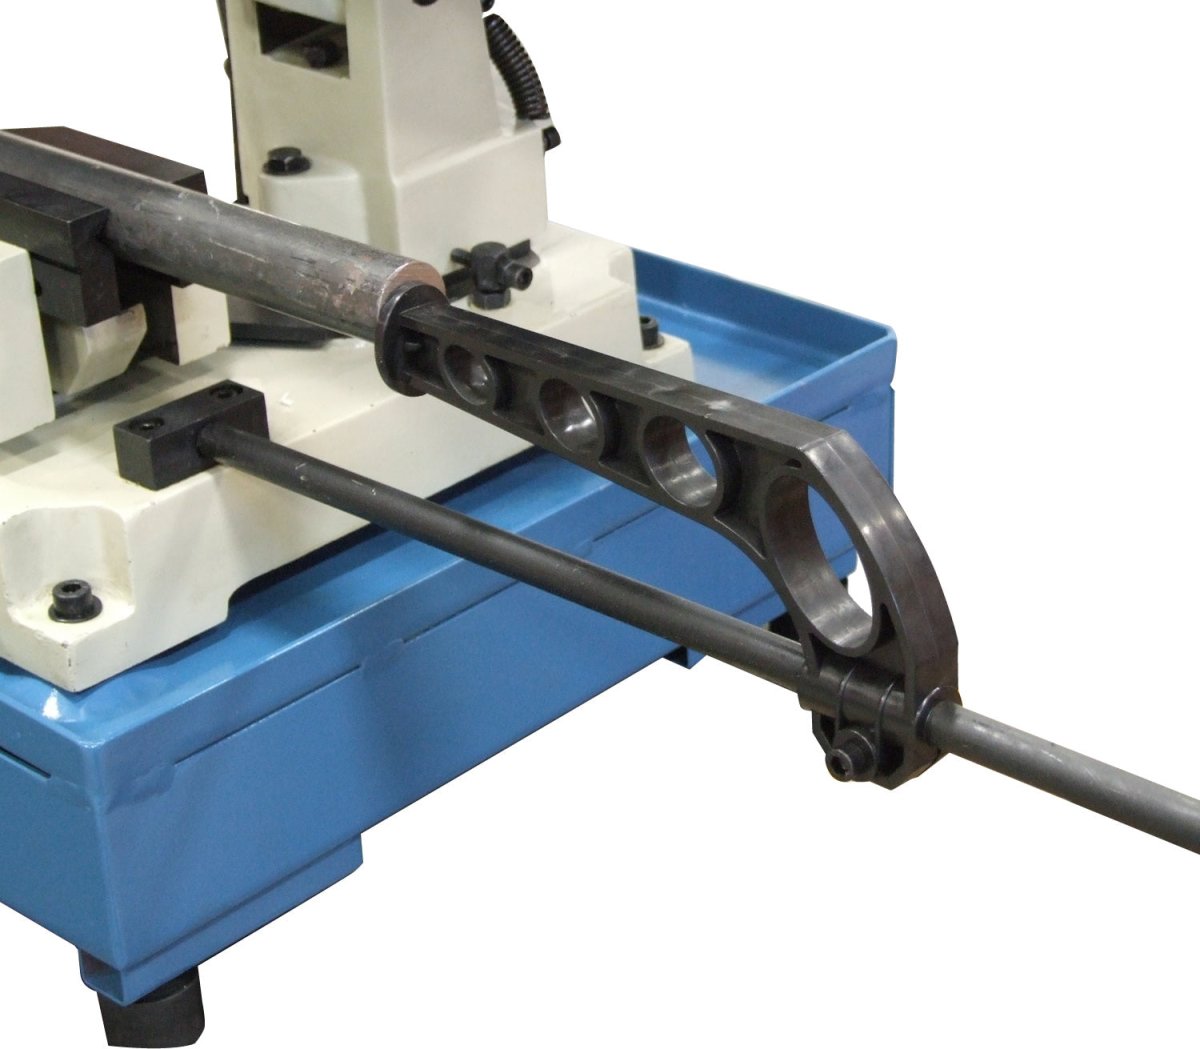 Manually Operated Coldsaw CS-225M - Baileigh